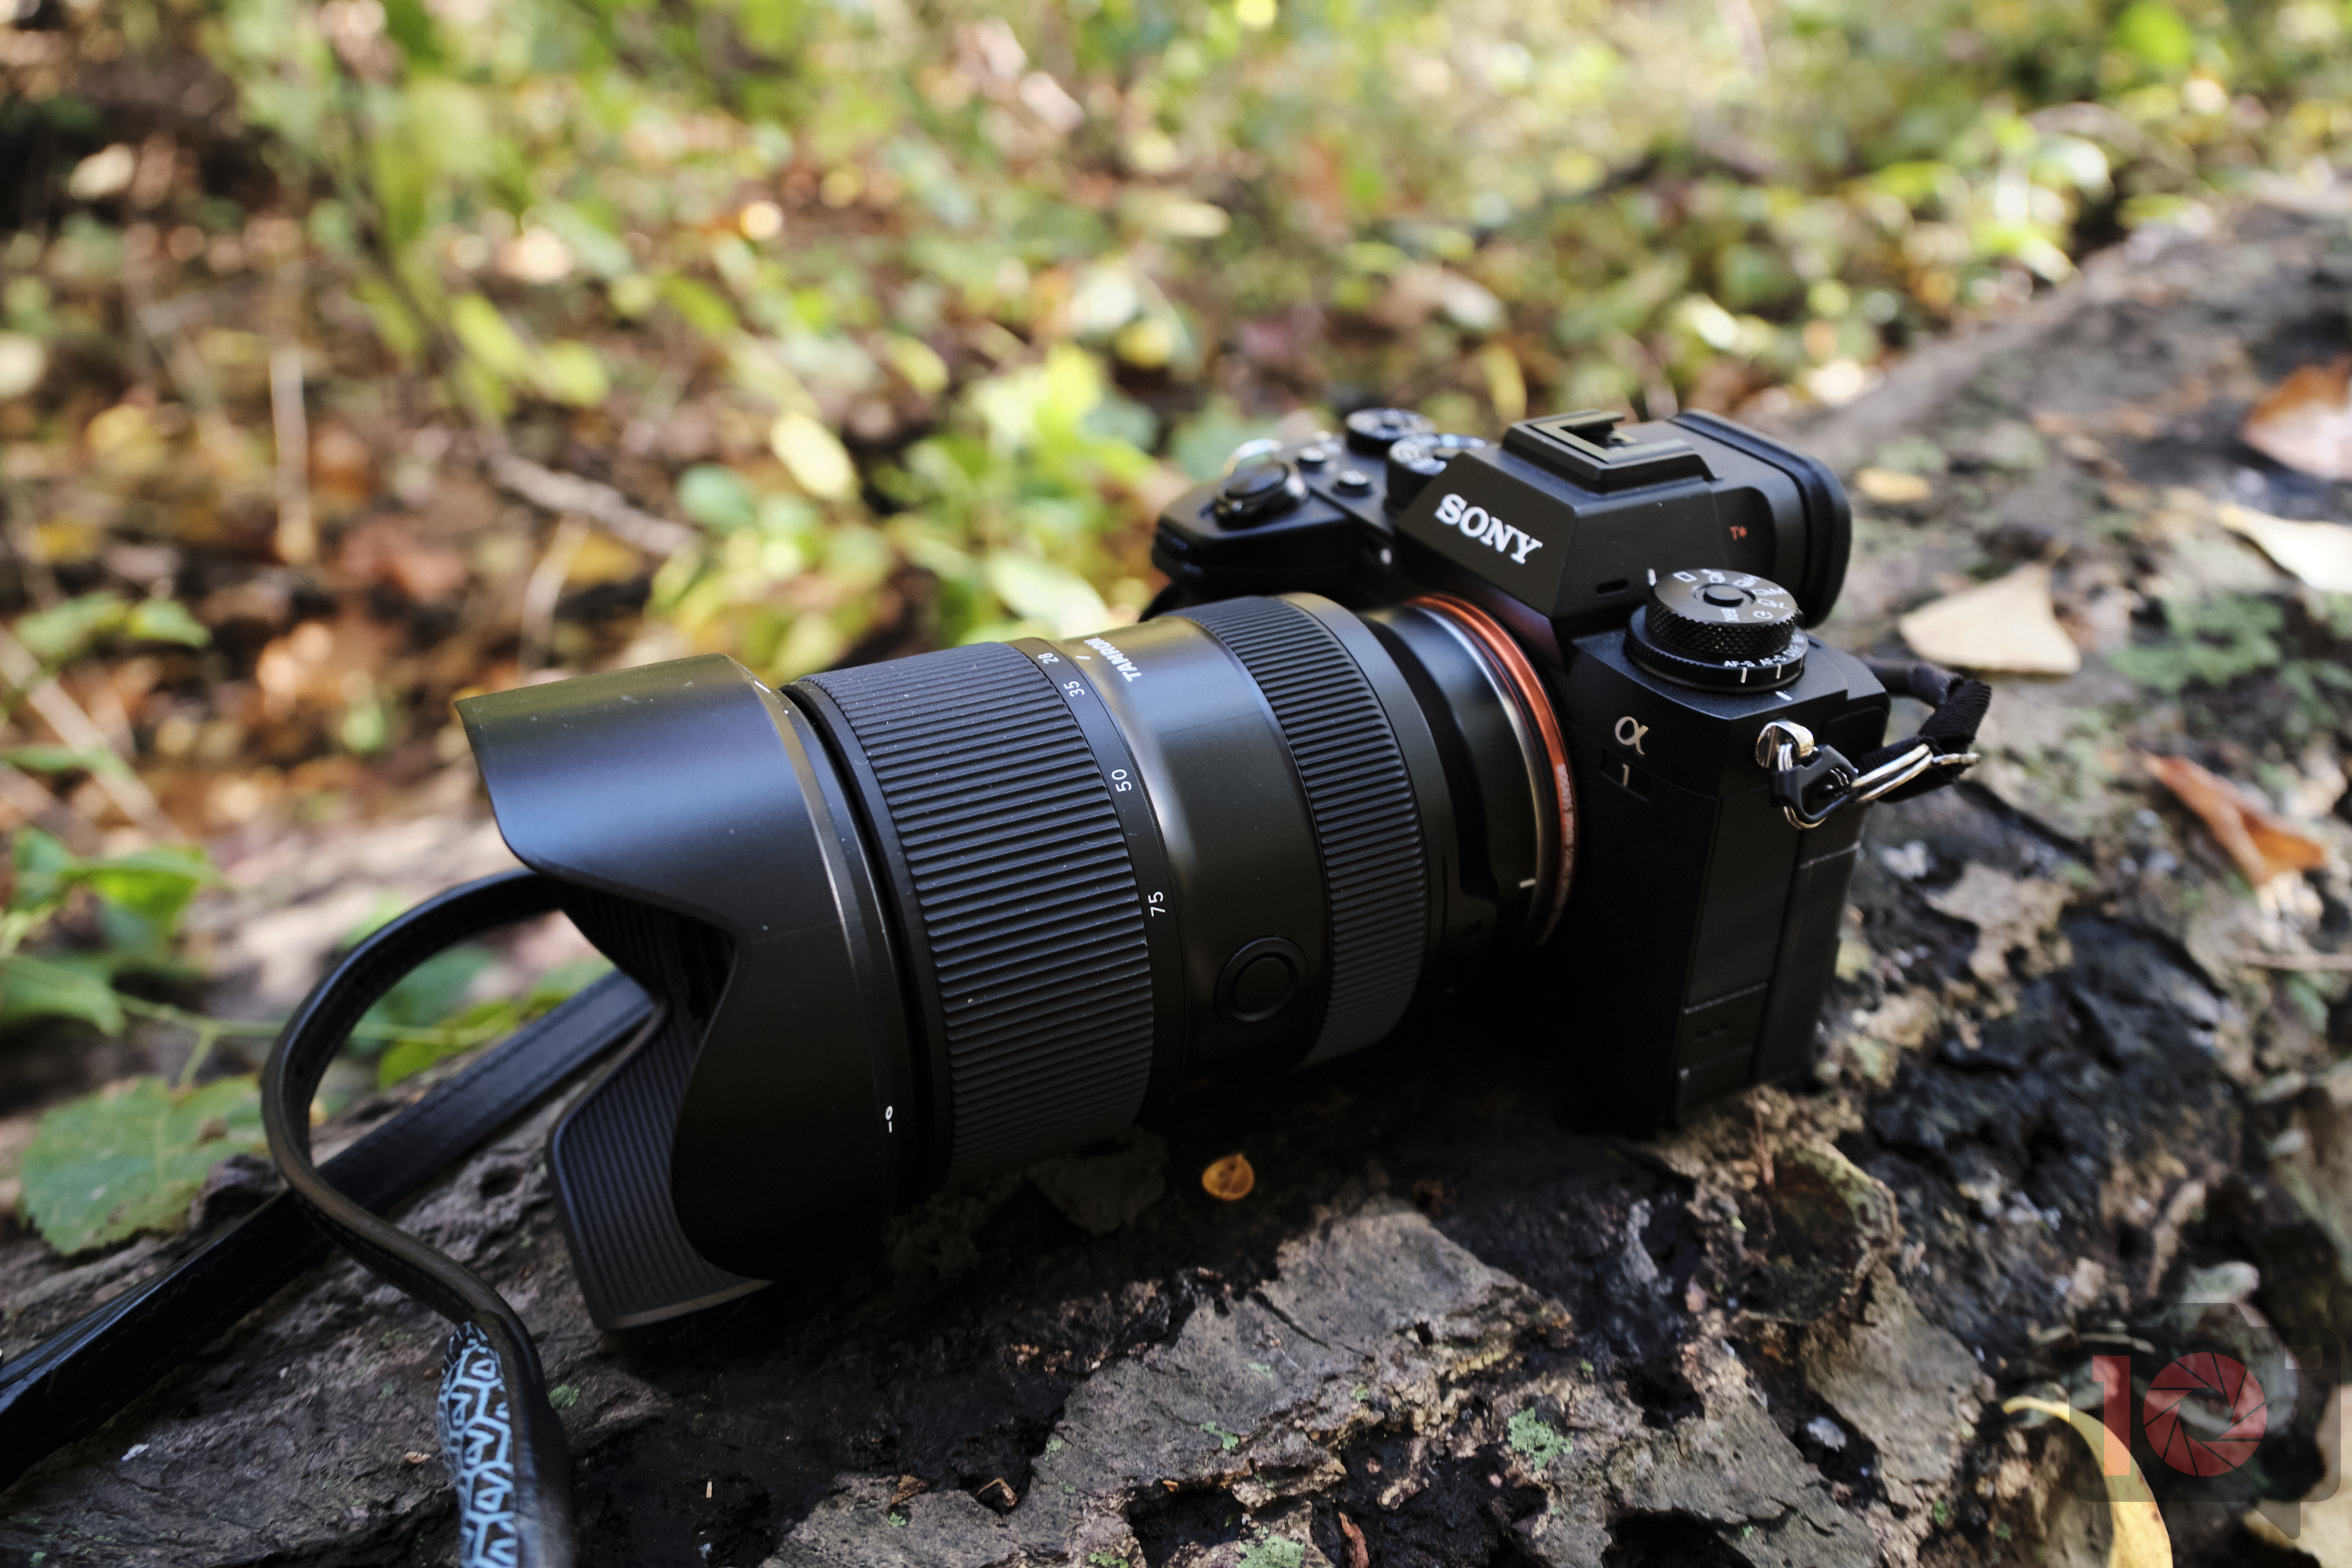 Chris Gampat The Phoblographer Tamron 28-75mm f2.8 G2 review product images 3.51-85s1600